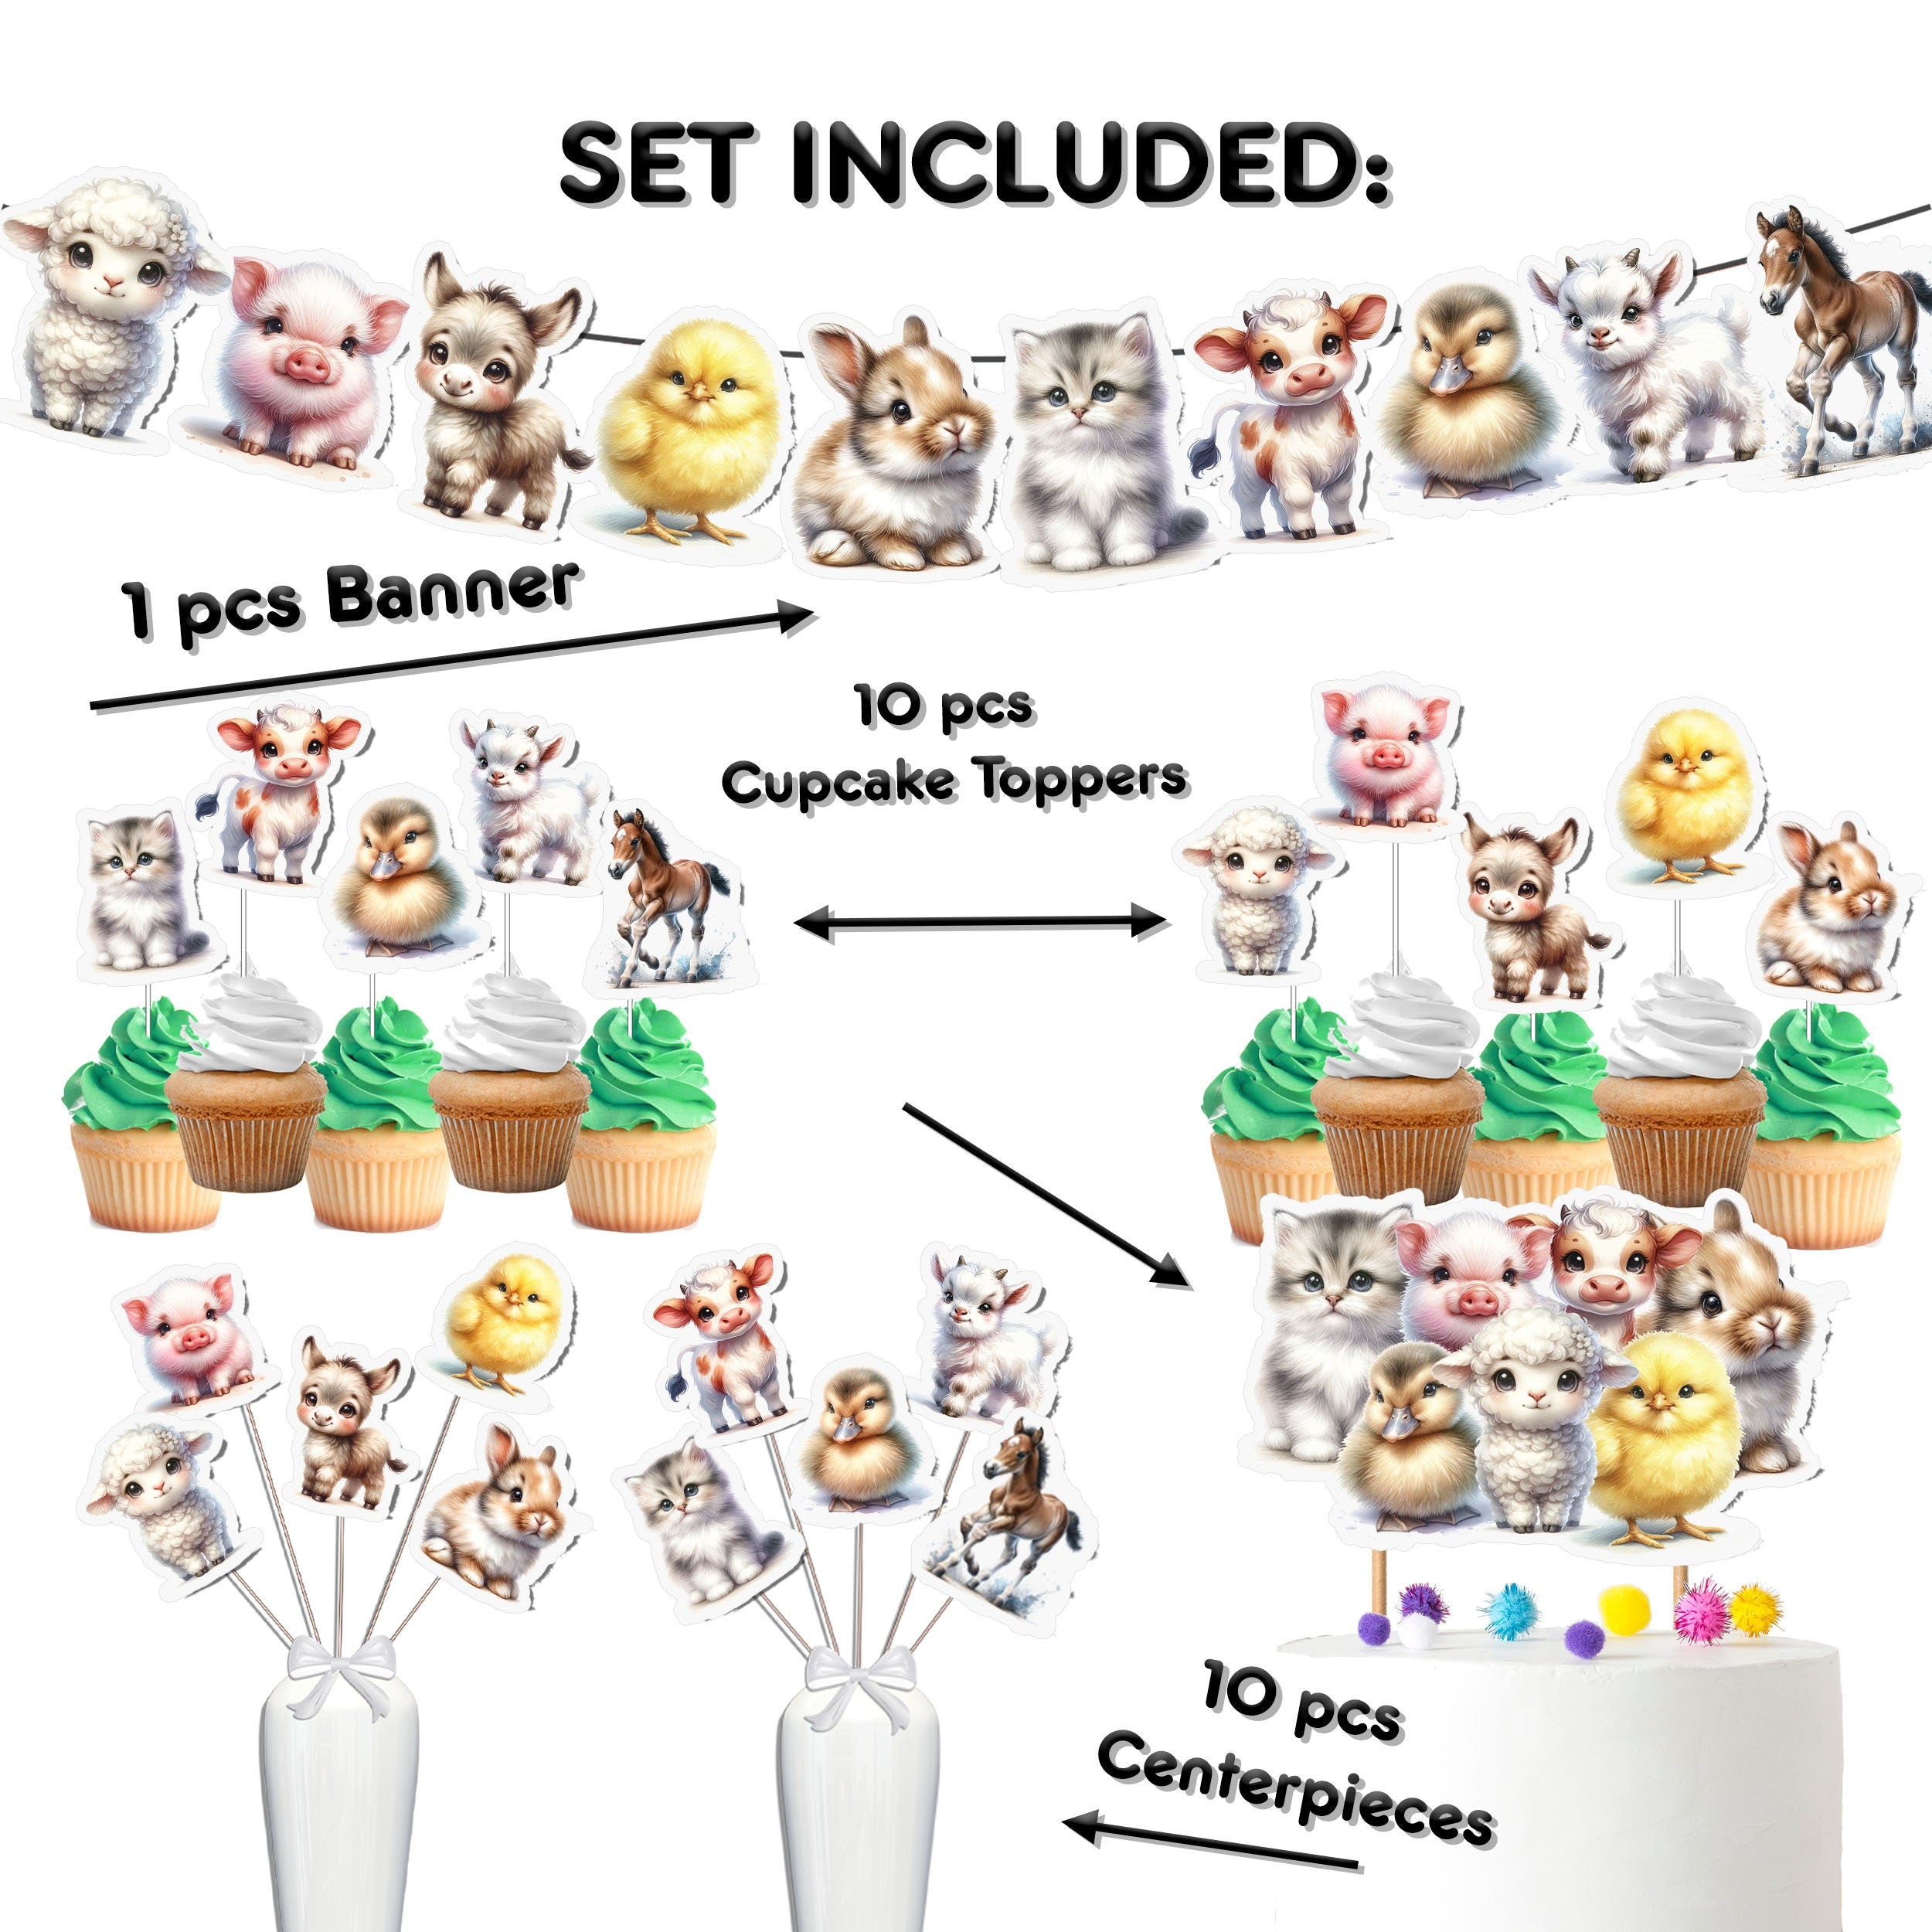 Barnyard Fun Farm Animals Party Decor Set - Banner, Cake Topper, Cupcake Toppers & Centerpieces for Birthdays & Baby Showers